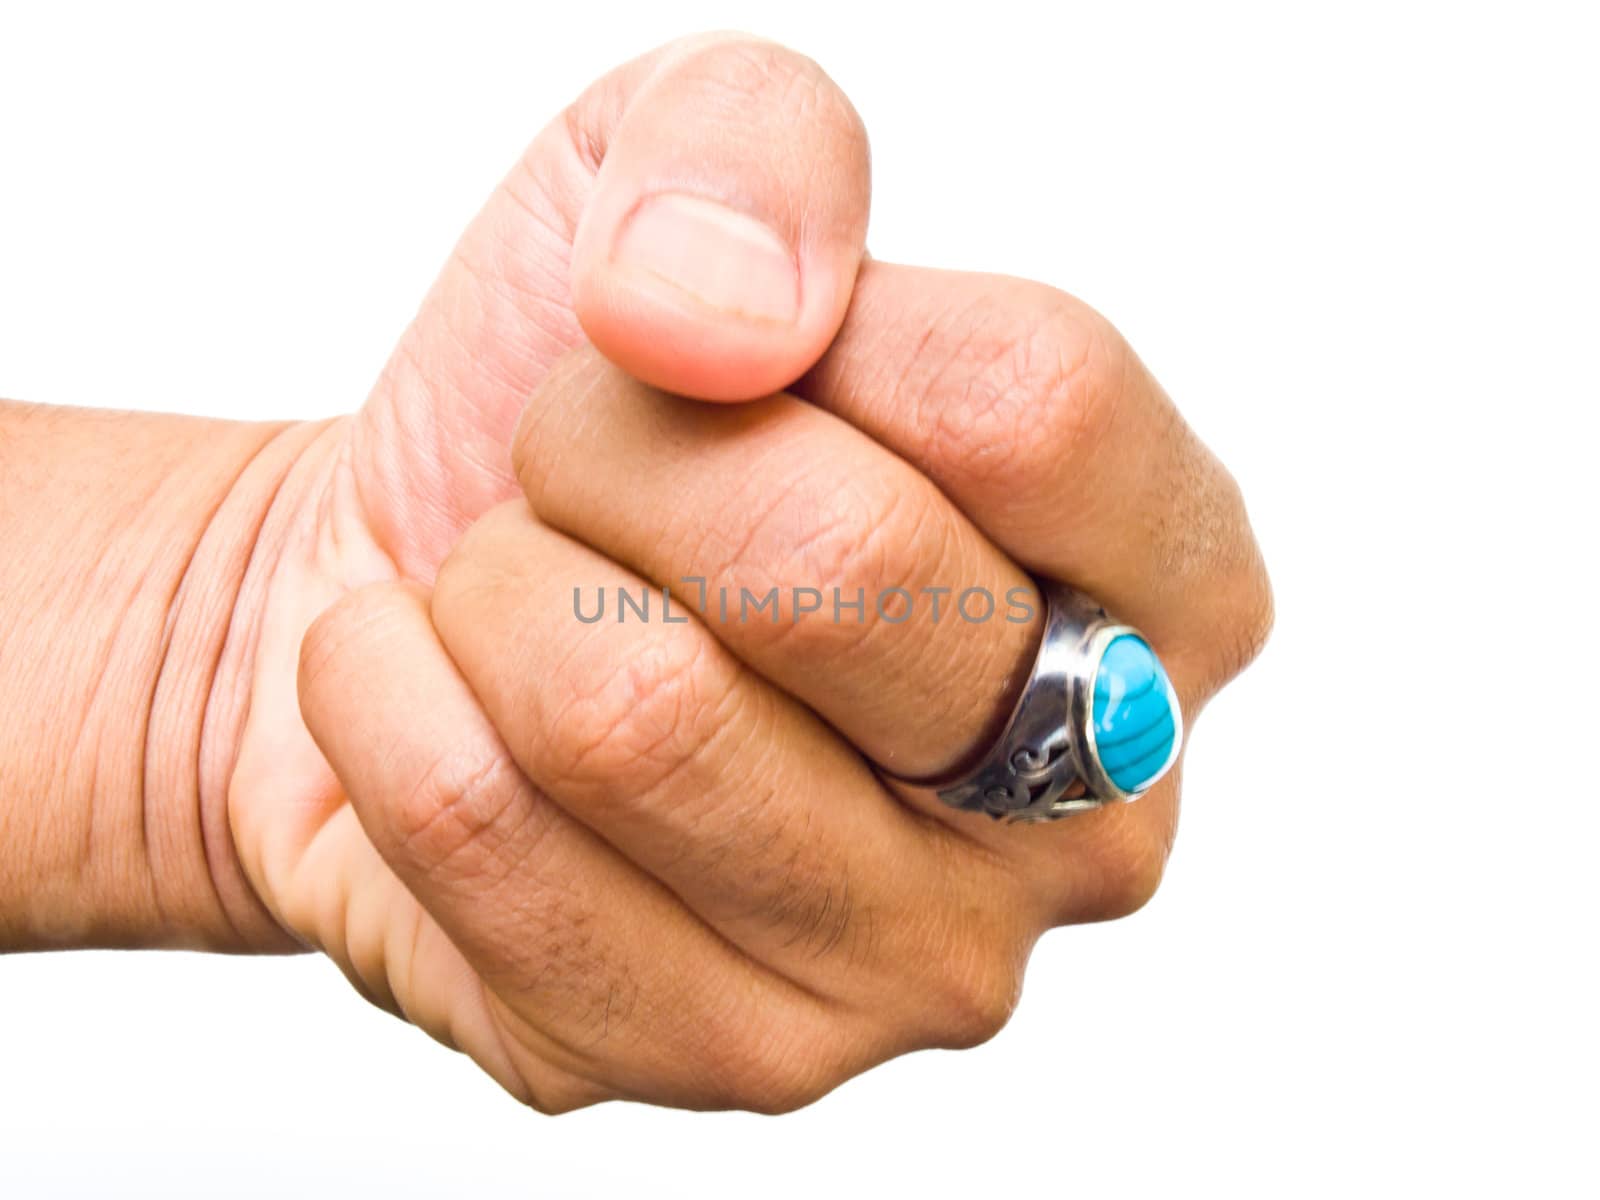 A guy hand with turquoise ring on his finger isolated on white background